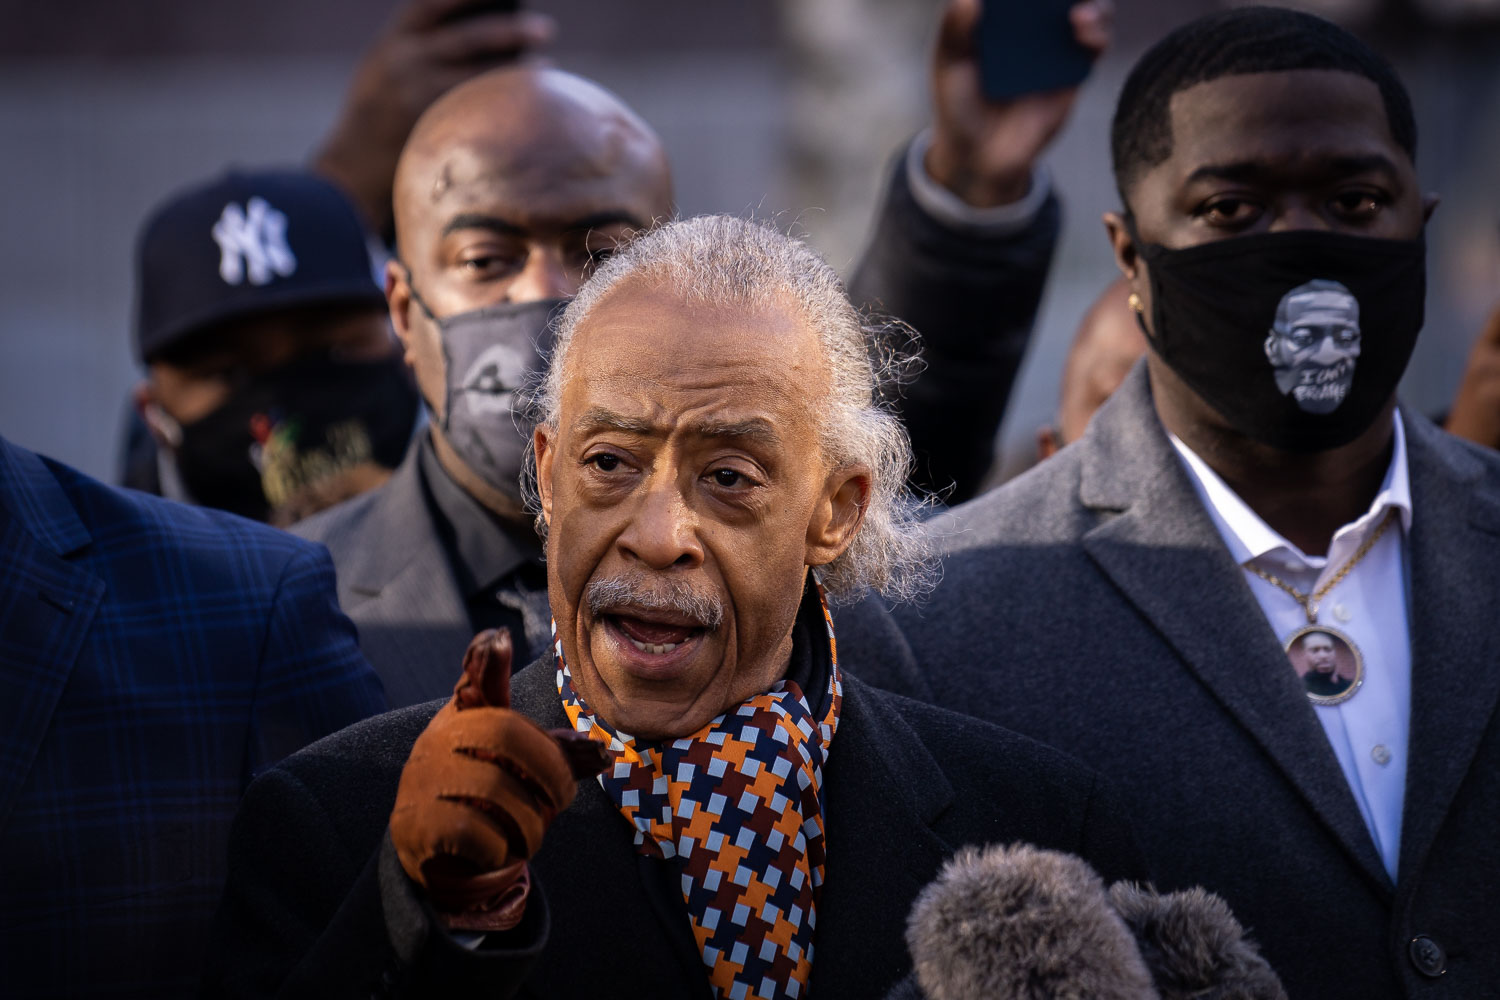 Rev Al Sharpton speaks outside the Hennepin County Government Center where opening statements of the Derek Chauvin trial were set to begin. He's joined by George Floyd's brothers Philonise and Terrence Floyd.